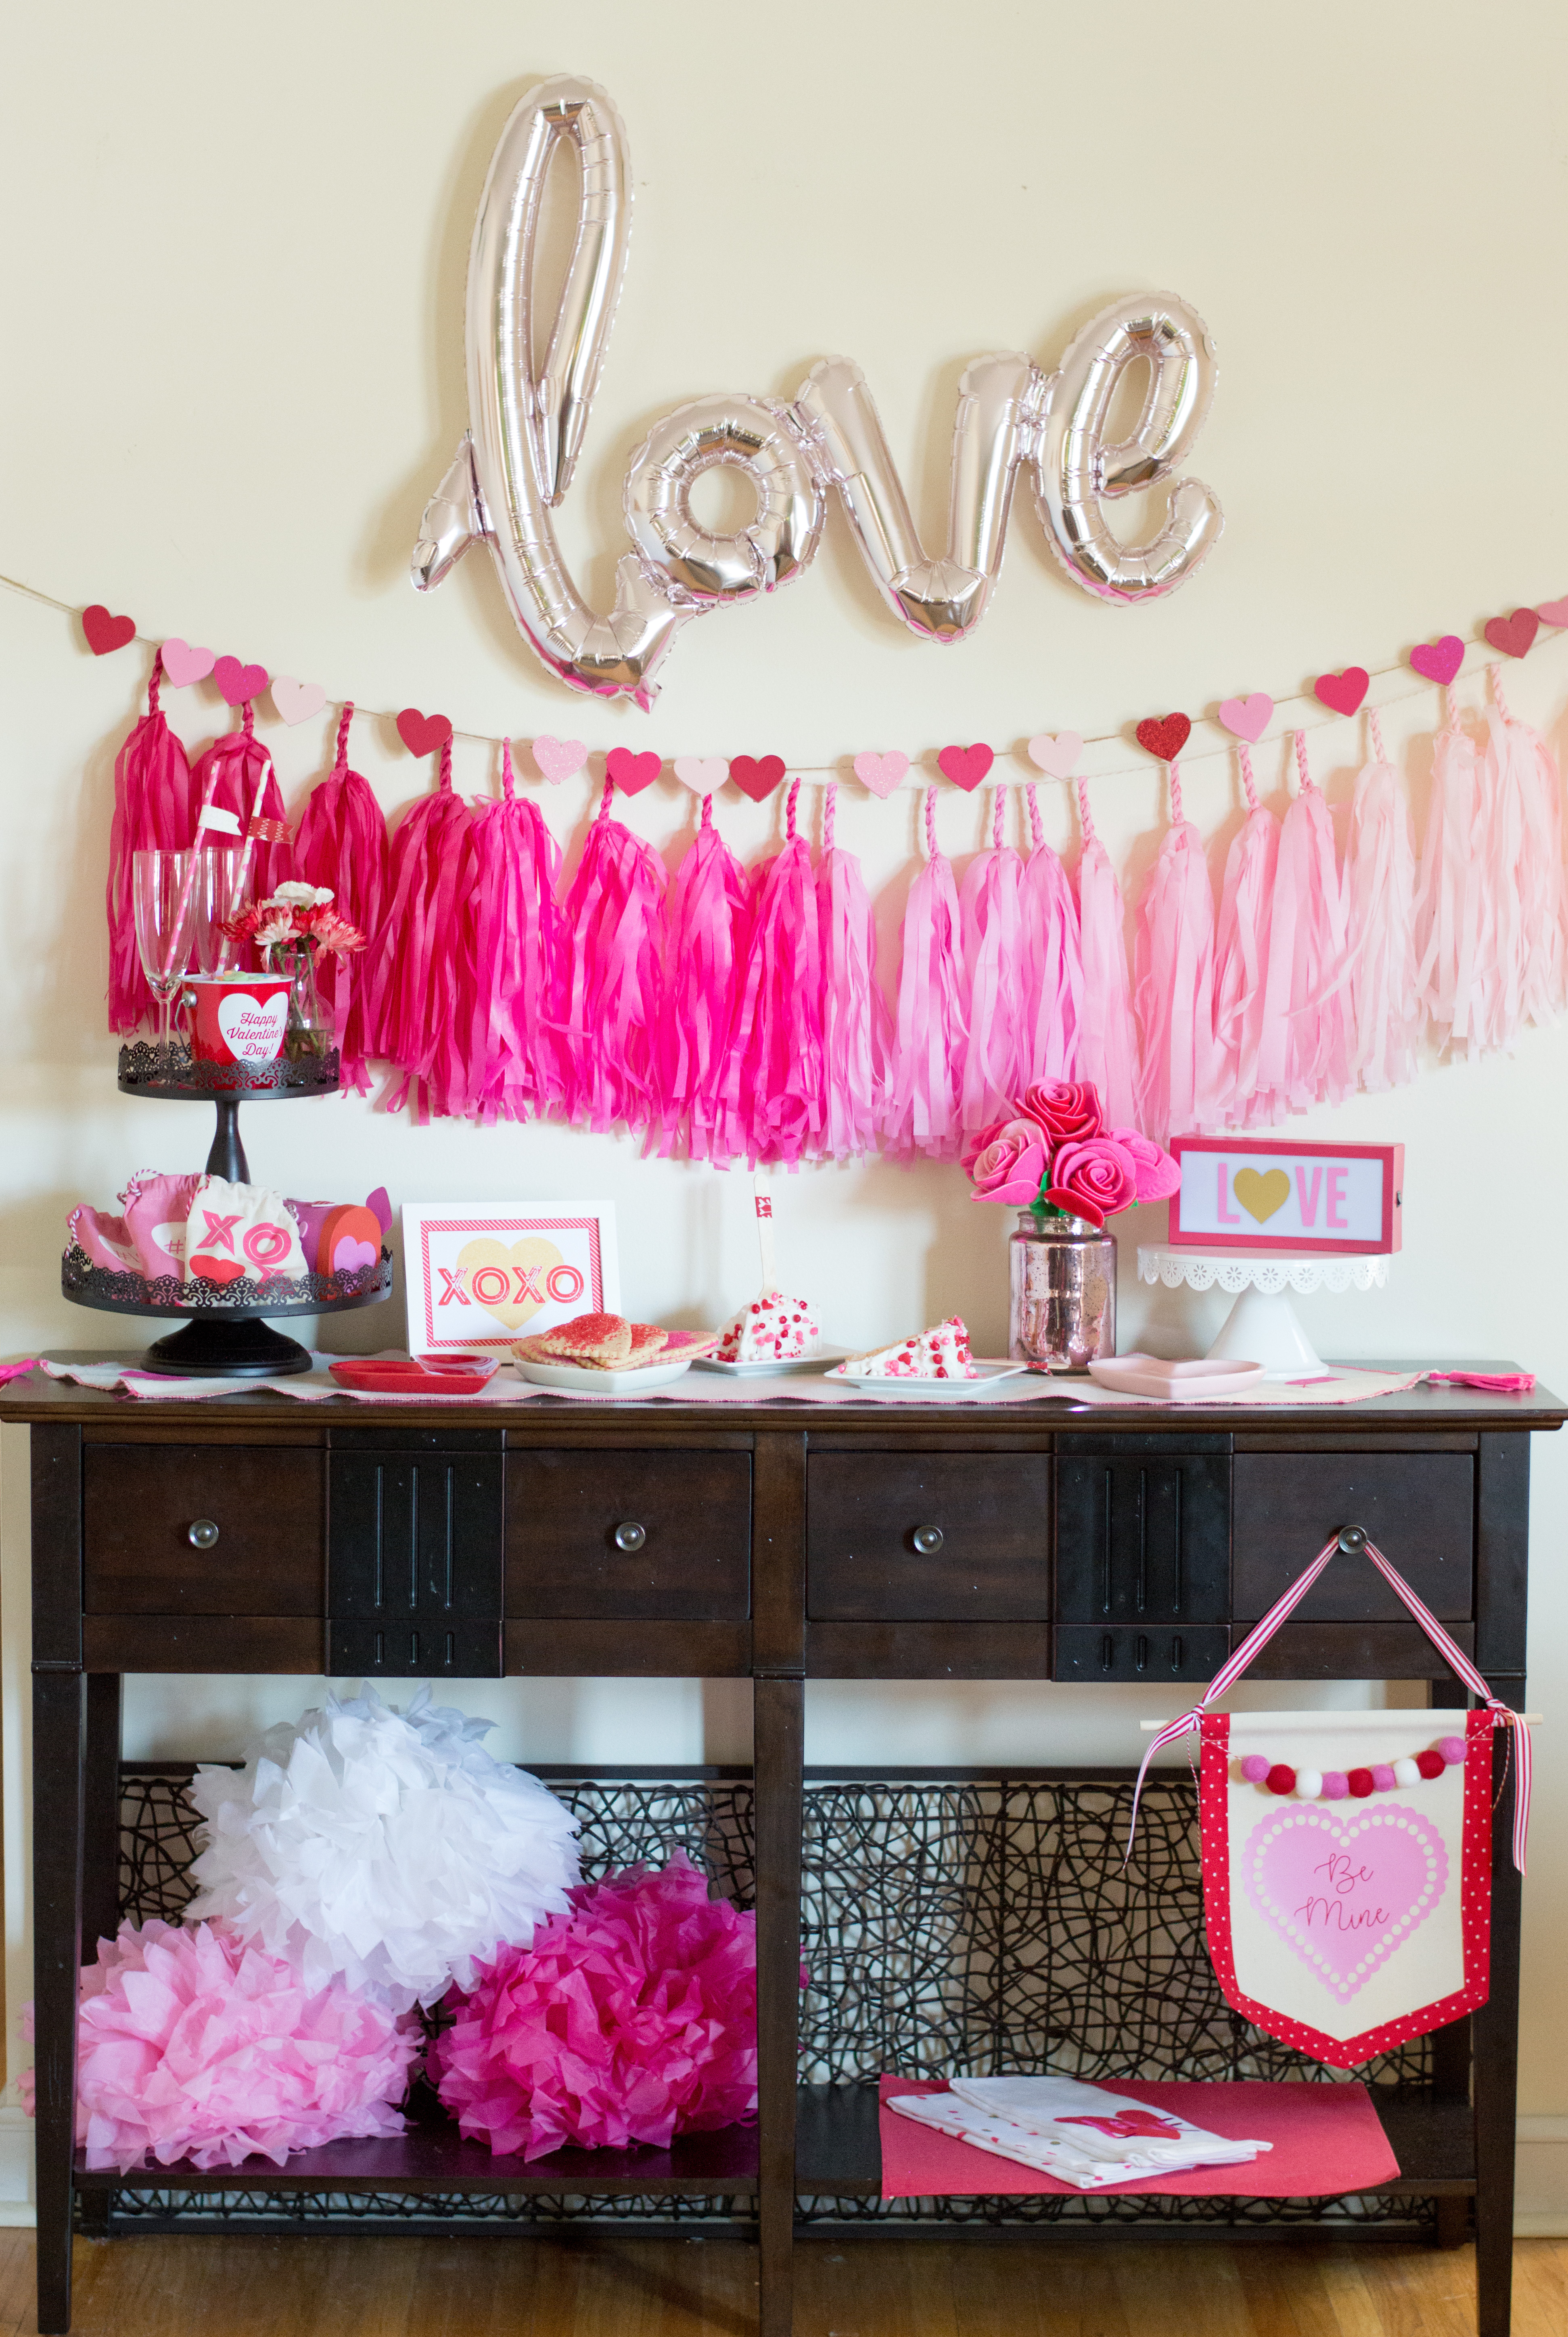 "Love" Valentine's Day Party Tablescape styled by Elva M Design Studio